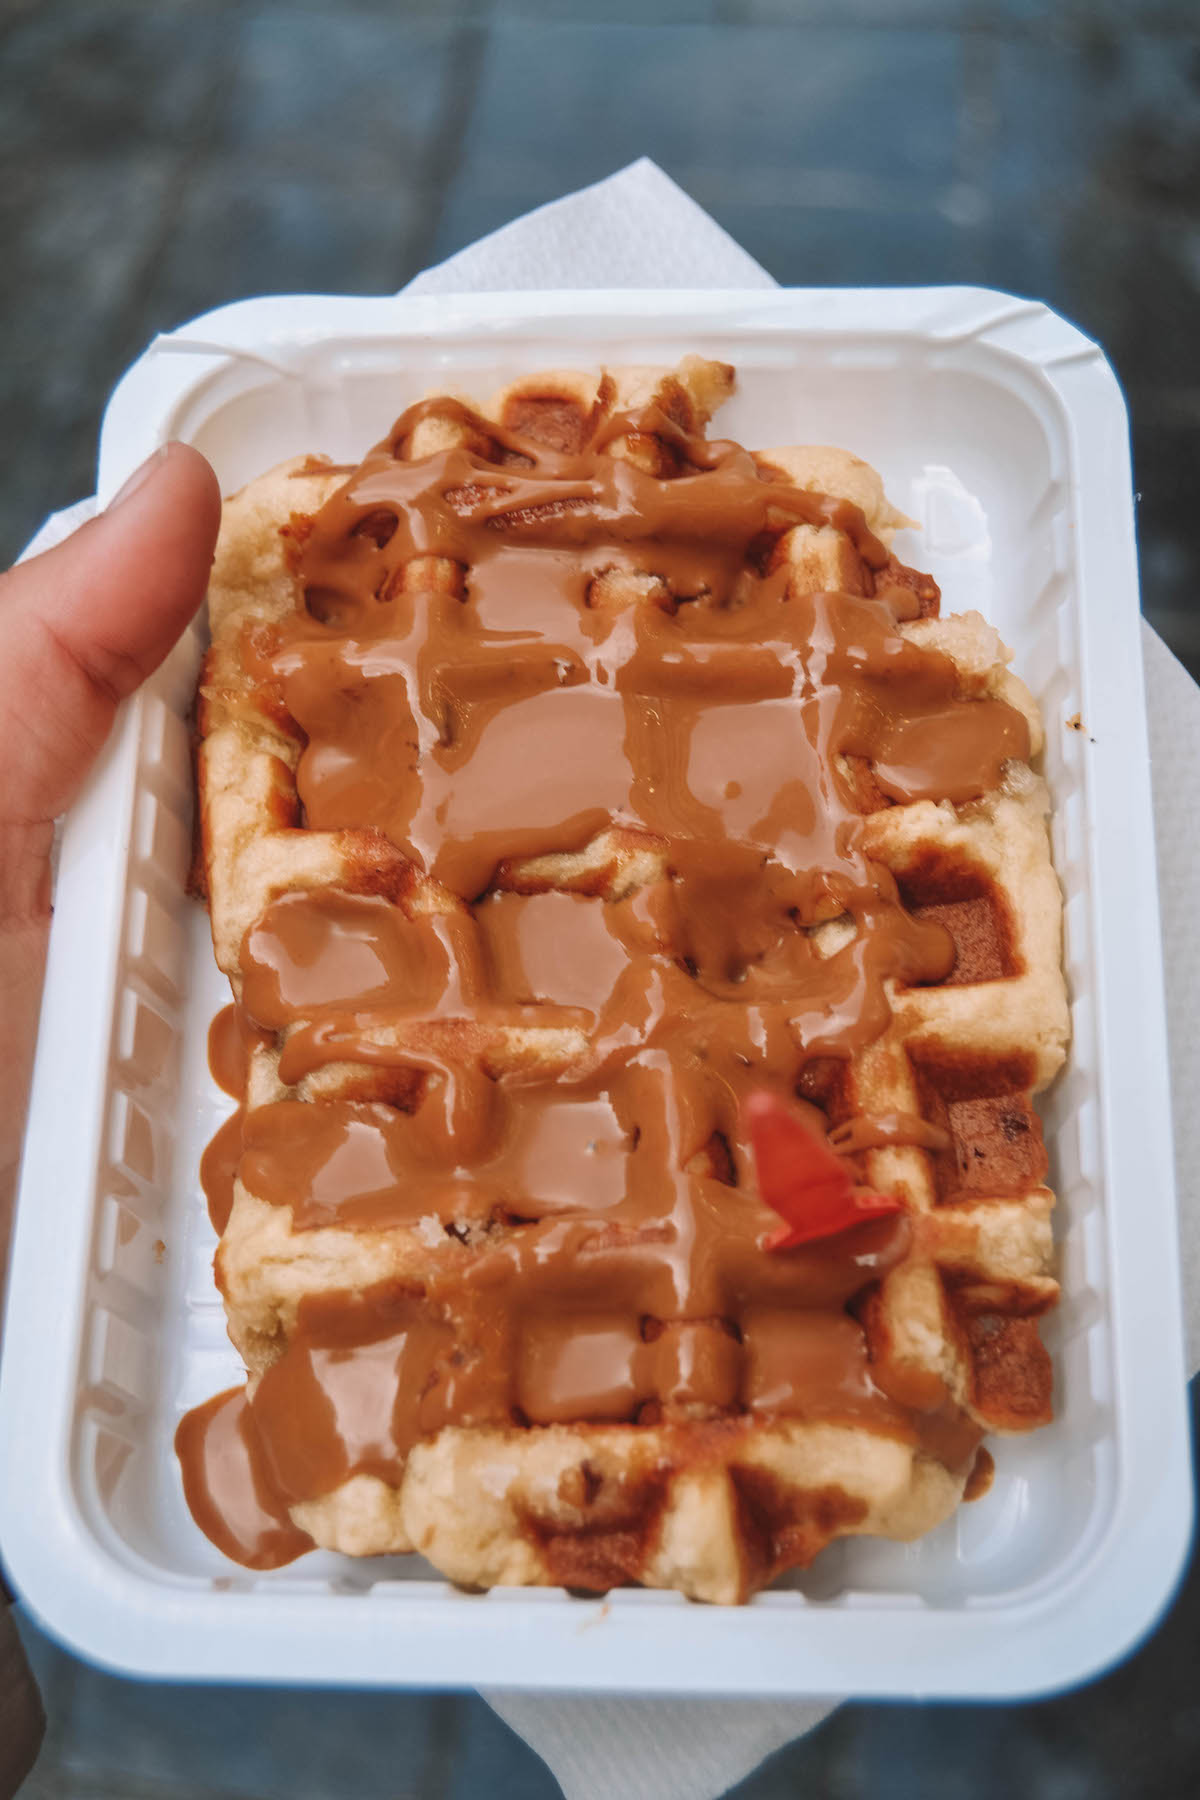 A Belgian waffle drizzled with Biscoff spread